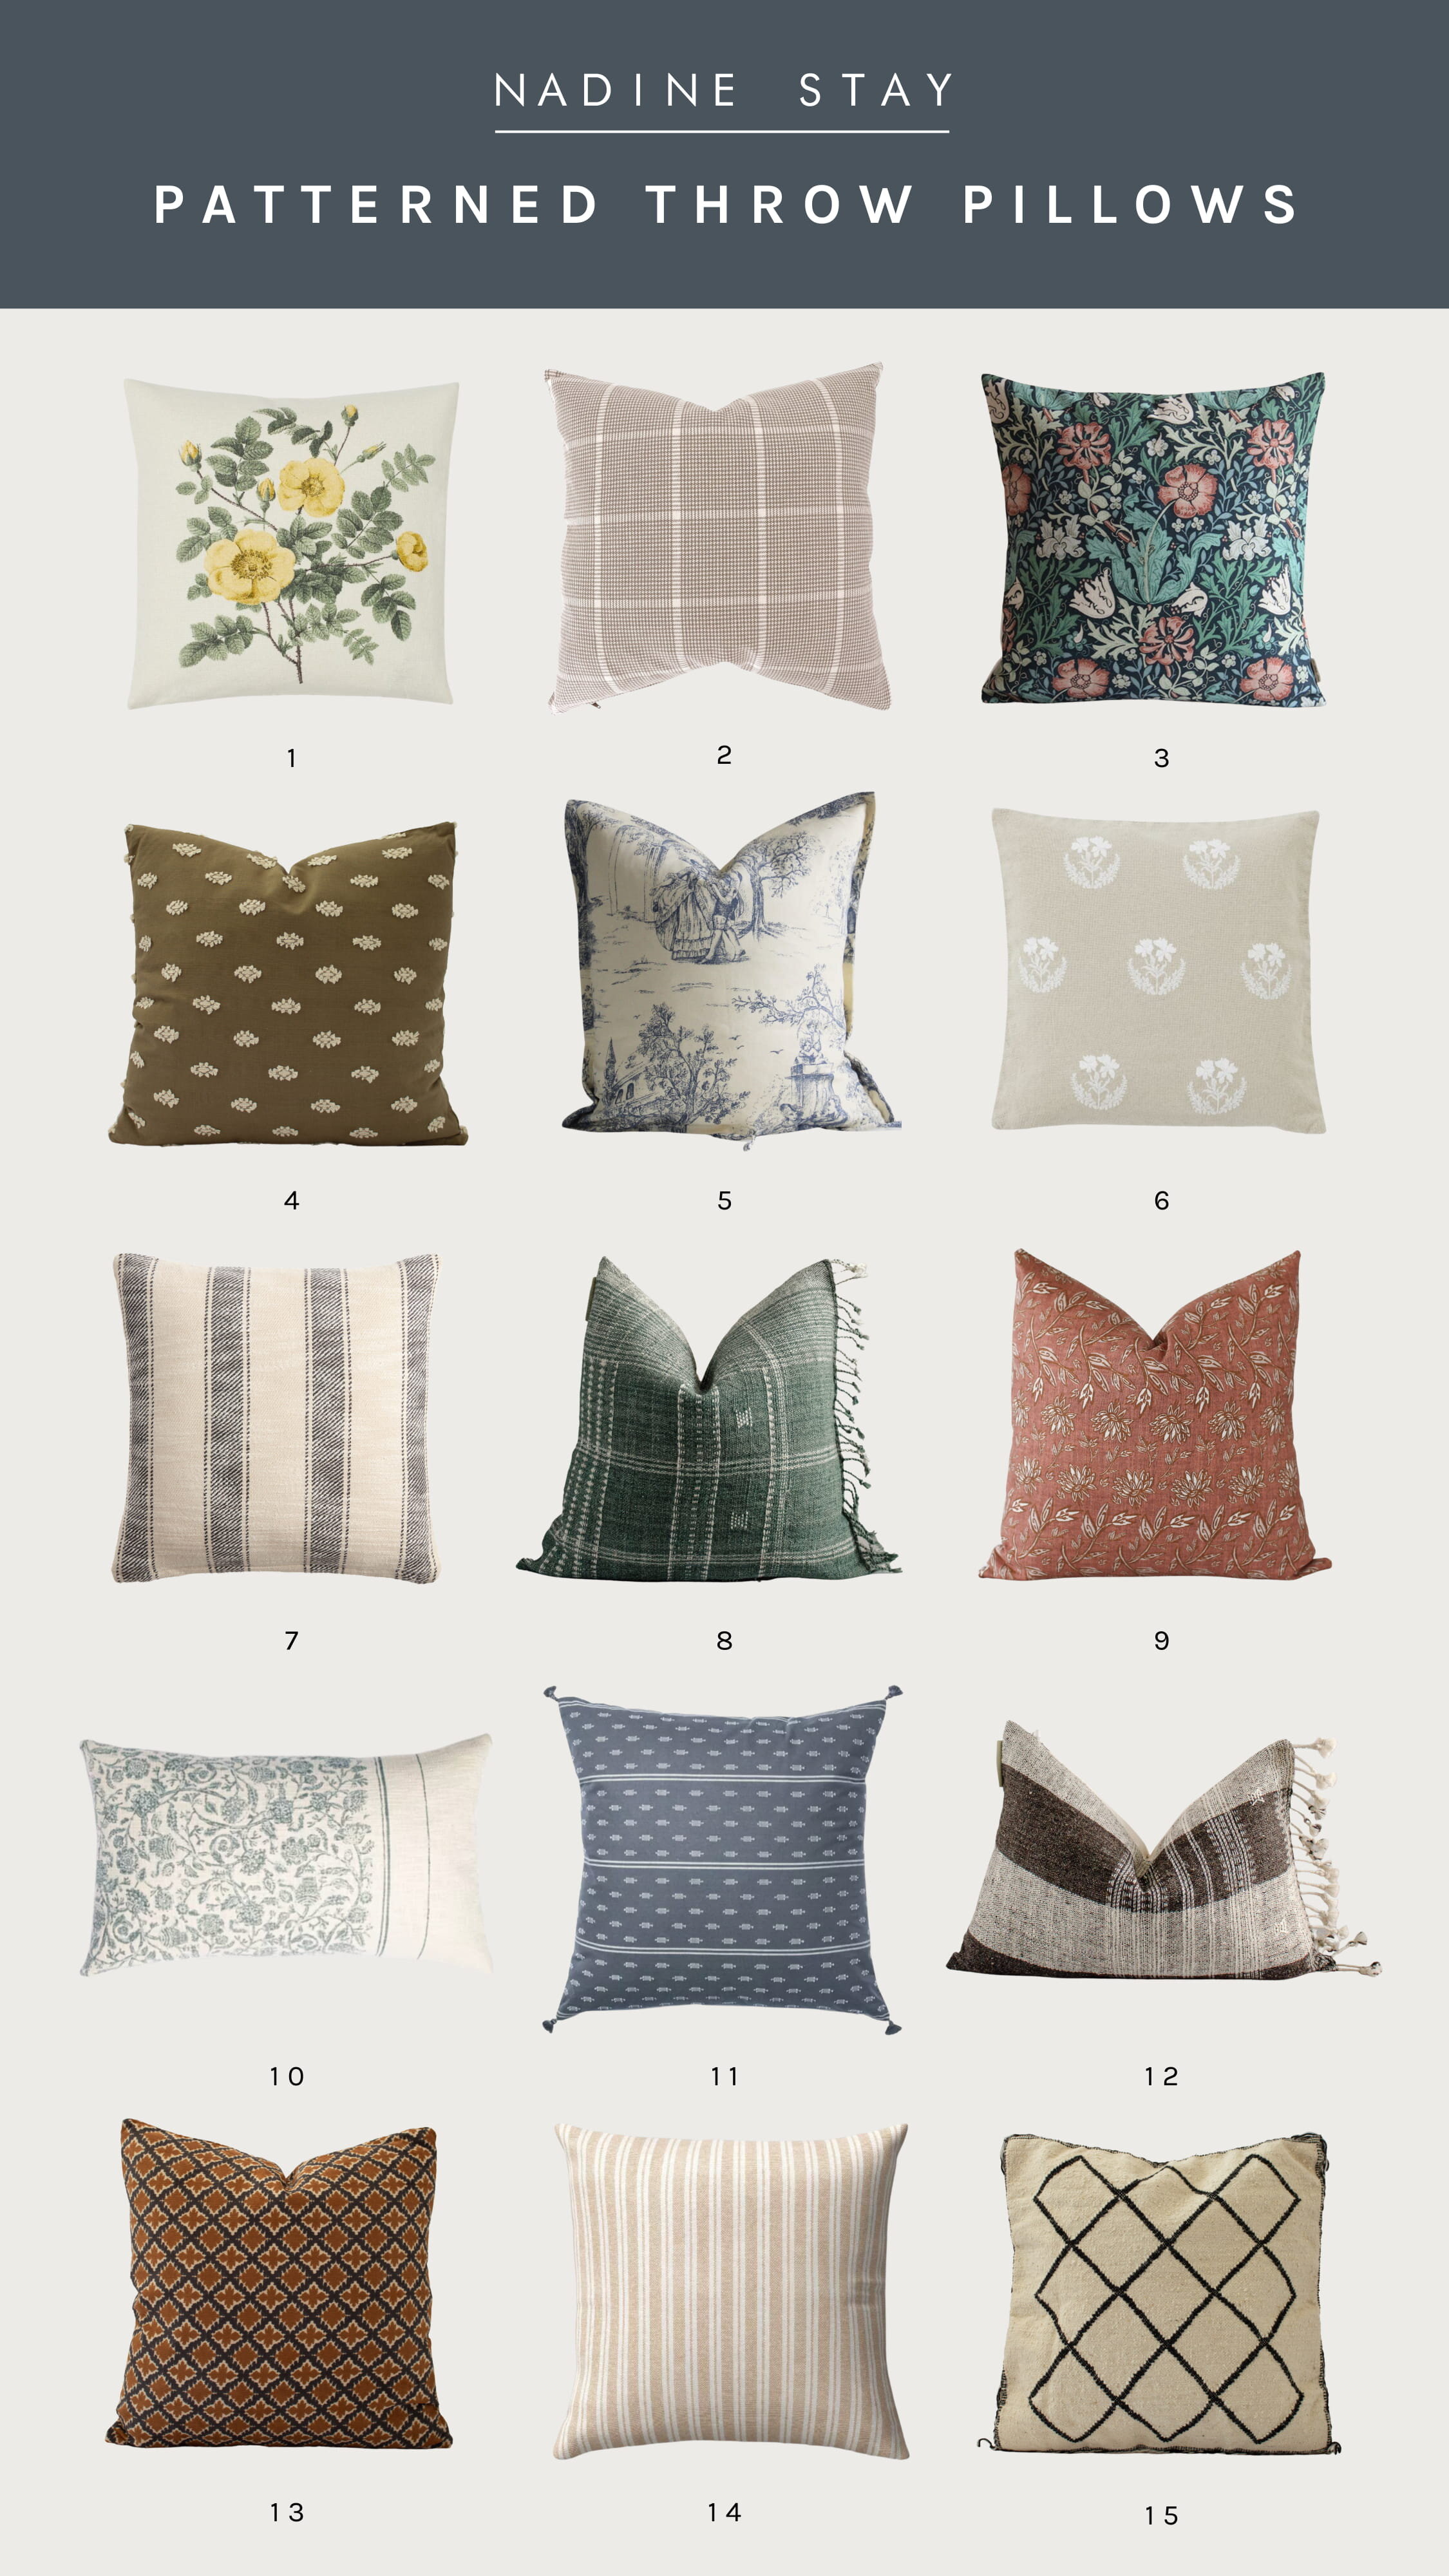 How to Style Couch Pillows: 10 Tips & Tricks - Run To Radiance